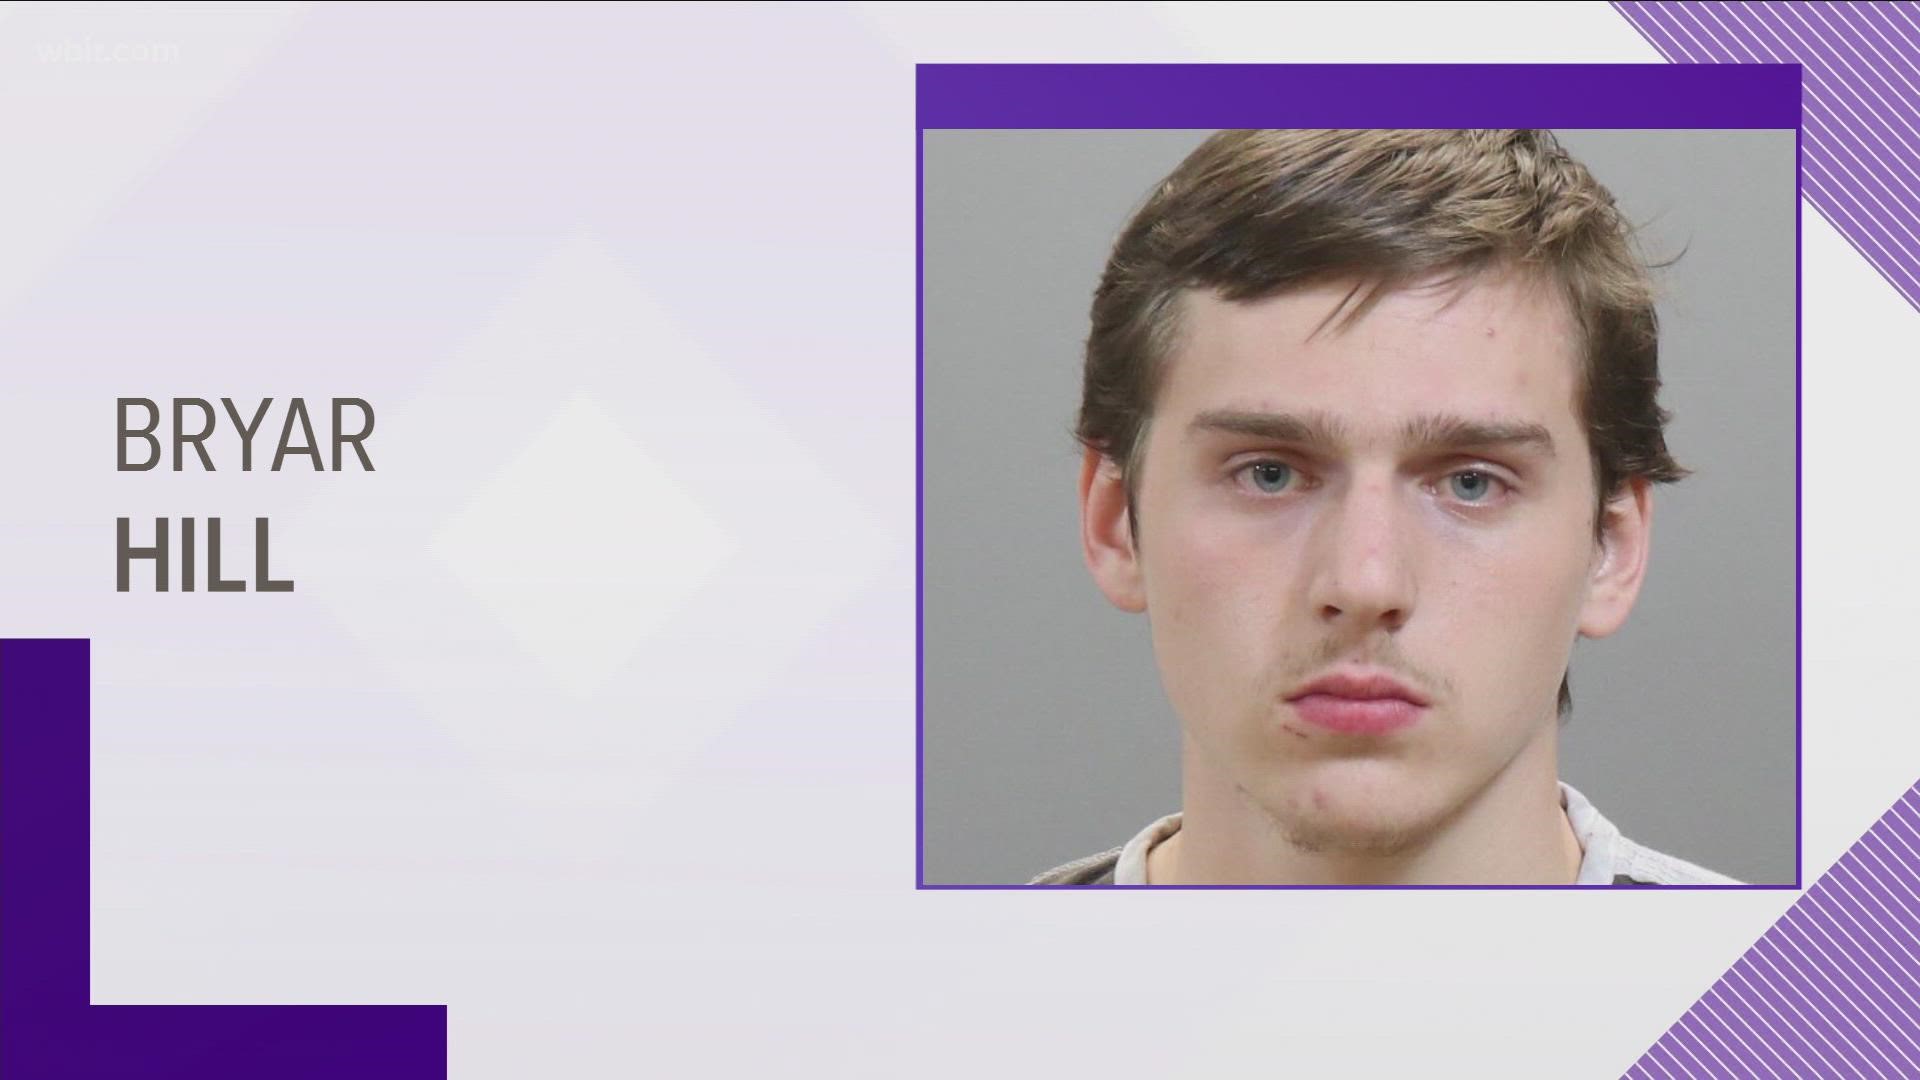 An 18-year-old faces kidnapping charges after police say he threatened to shoot two women.